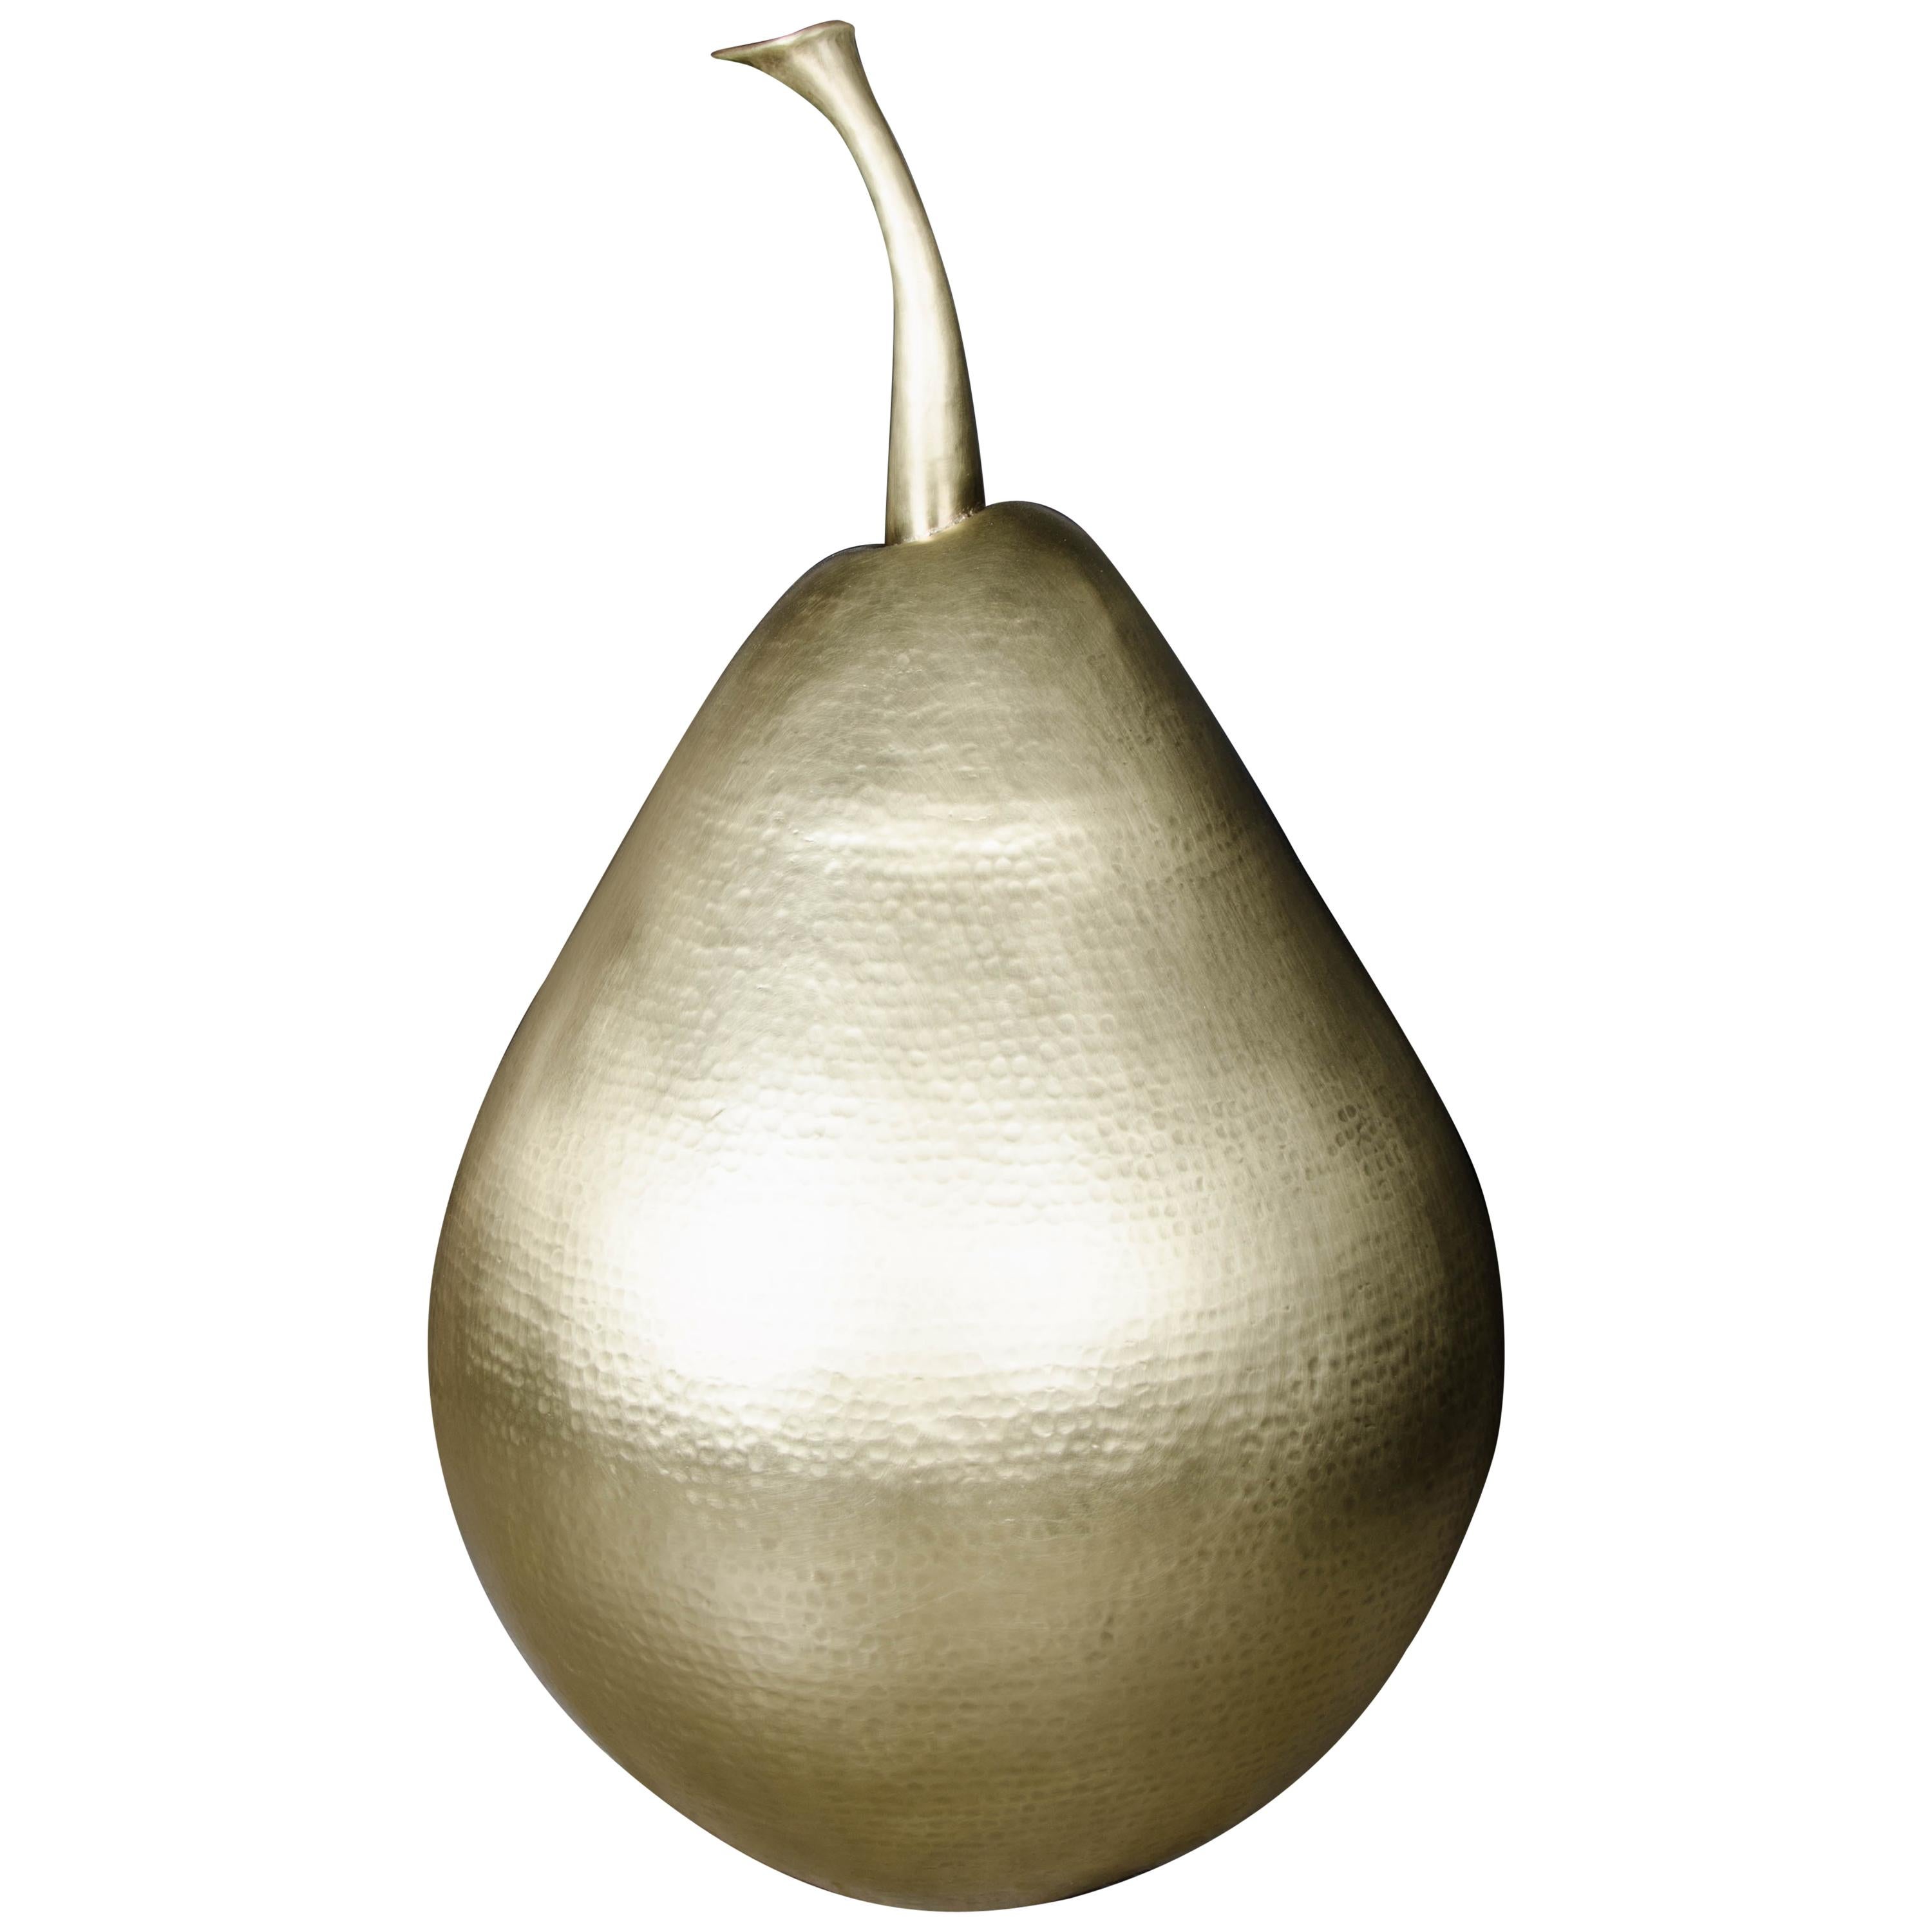 Repoussé Brass Pear Sculpture by Robert Kuo, Limited Edition